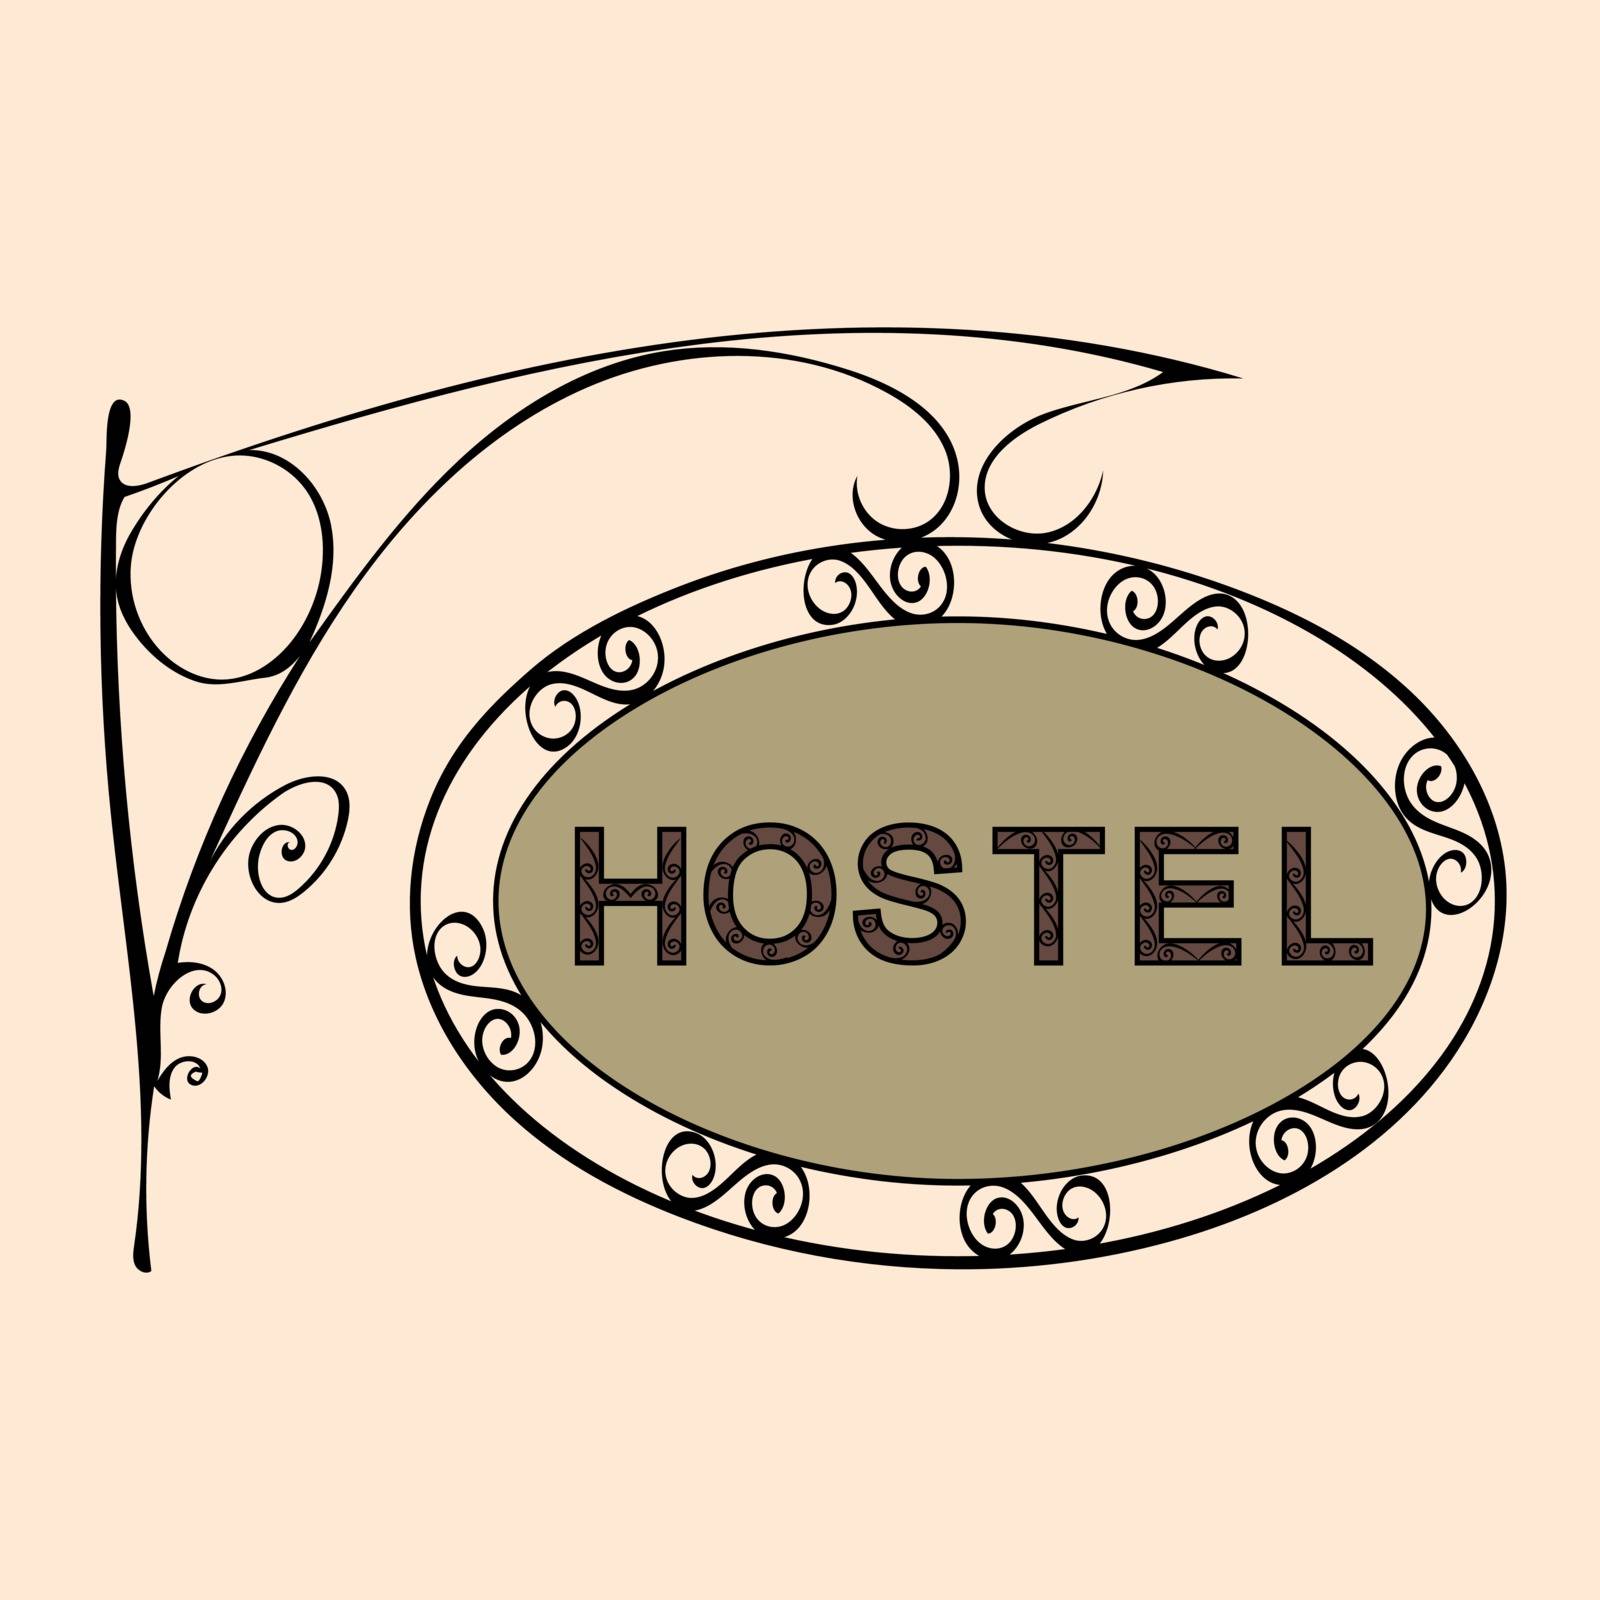 hostel text on vintage street sign Patterned forged street signboard with the text. Vector illustration